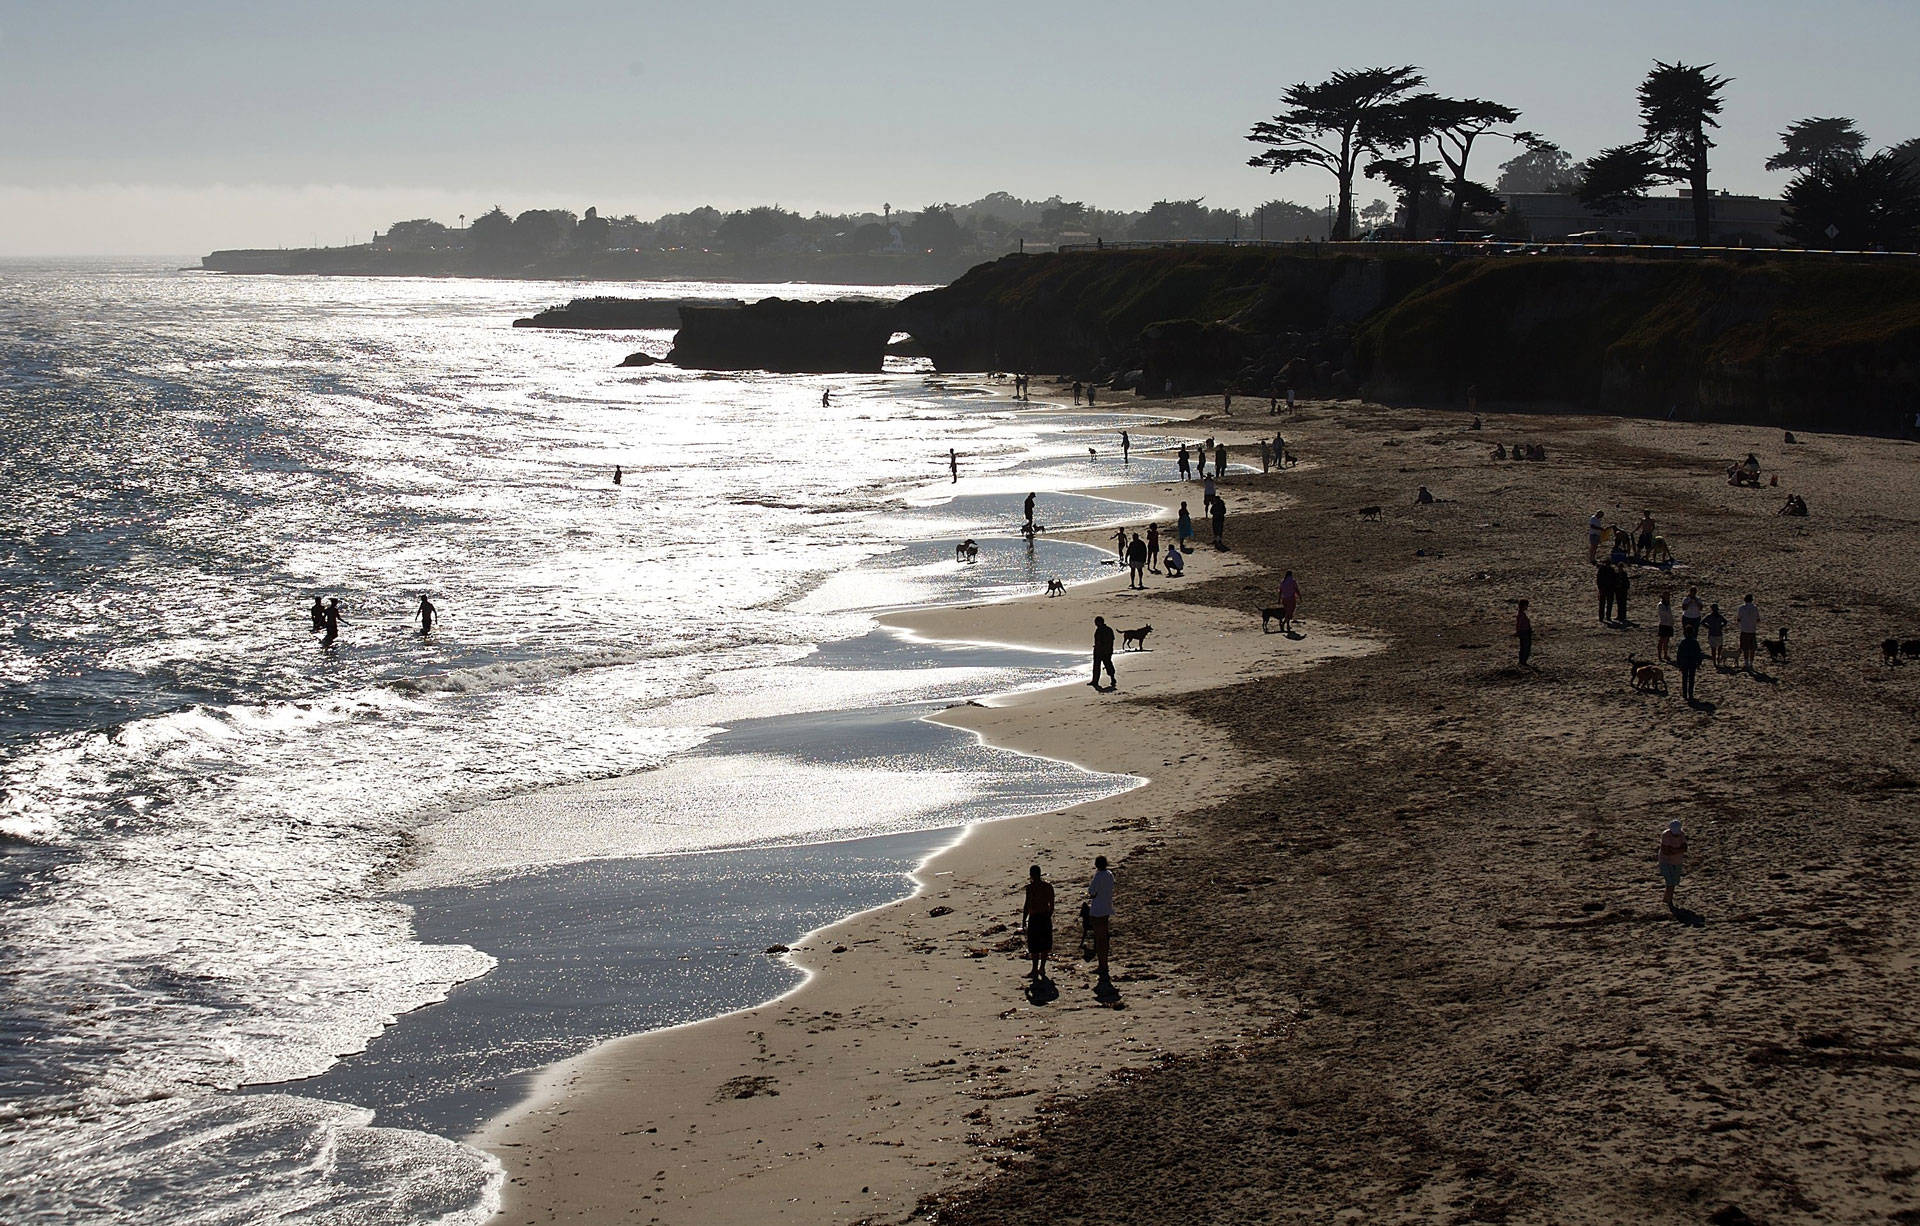 Visitors in Santa Cruz enjoy the beach below West Cliff Drive. Santa Cruz County has the second-highest poverty rate in the state, after Los Angeles. Stephen Dunn/Getty Images